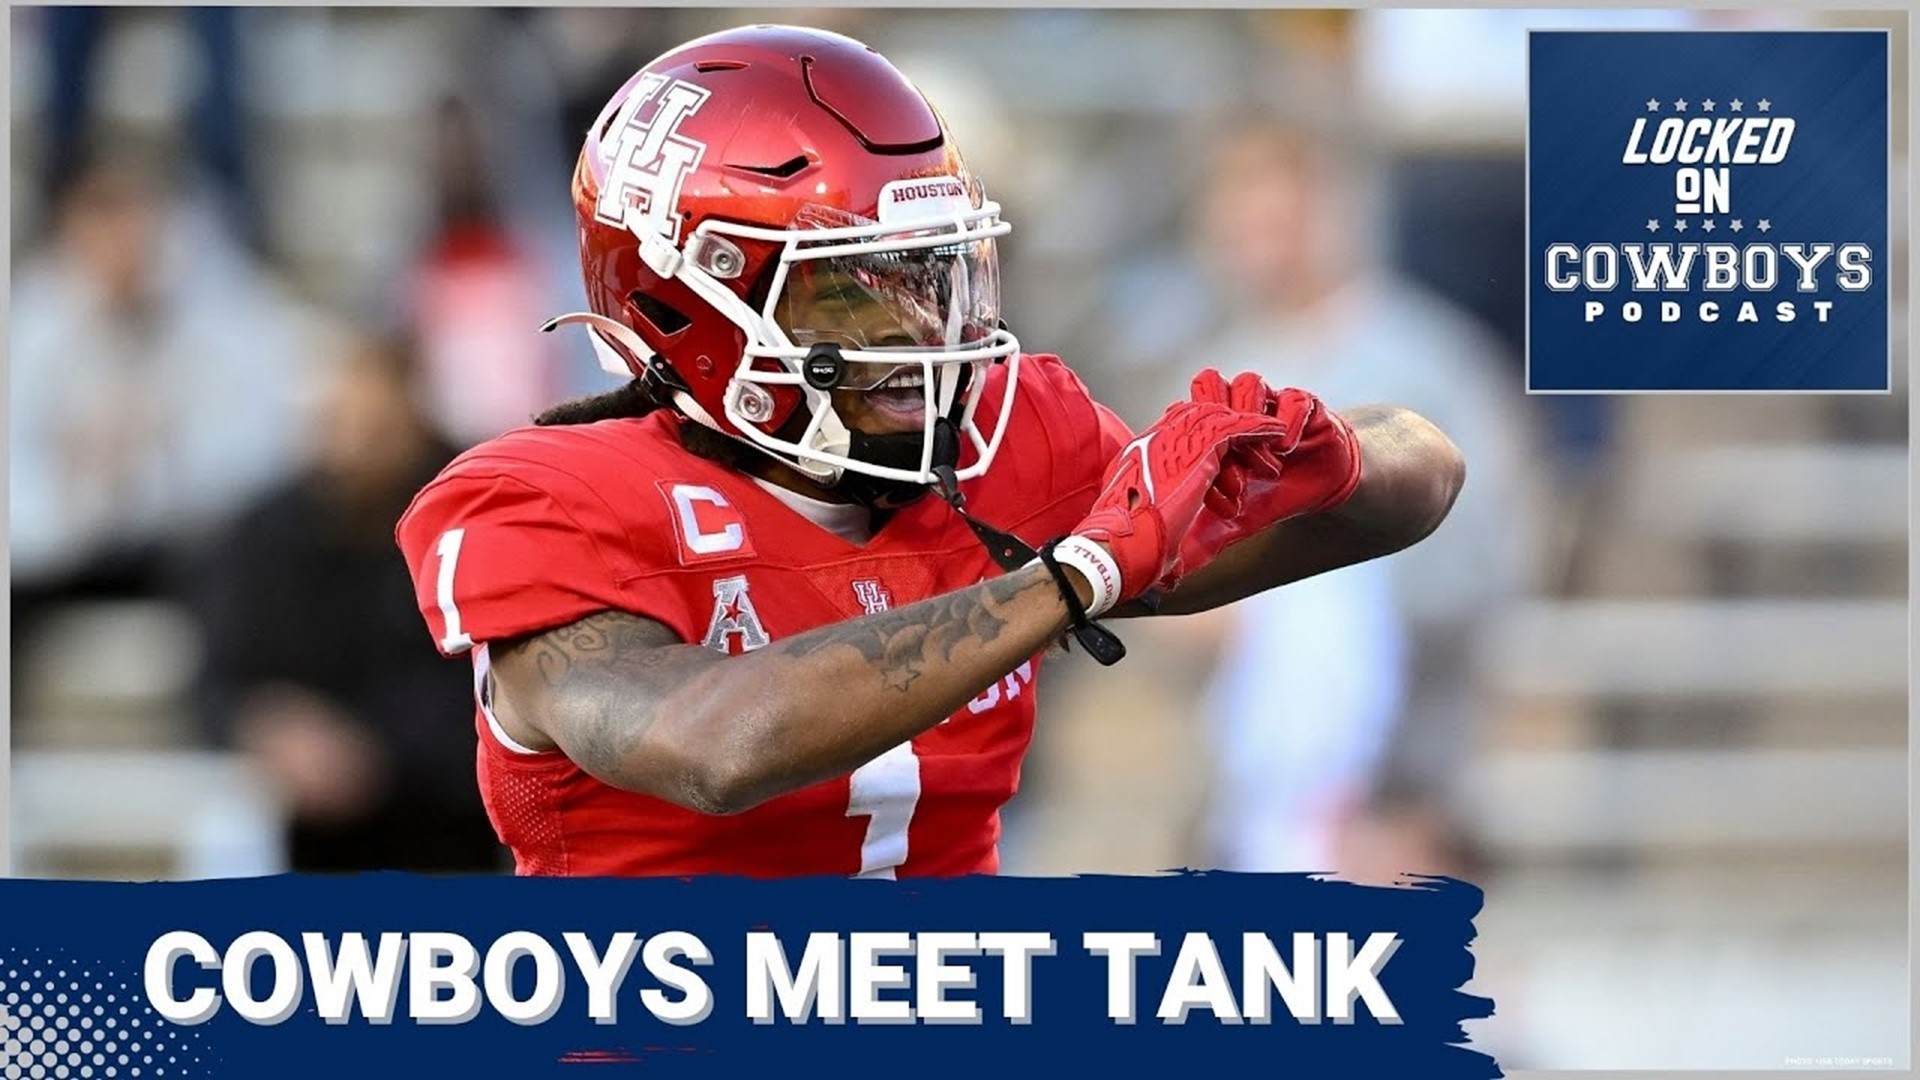 Marcus Mosher and Landon McCool discuss the Dallas Cowboys meeting with Houston WR Tank Dell ahead of the 2023 NFL Draft.